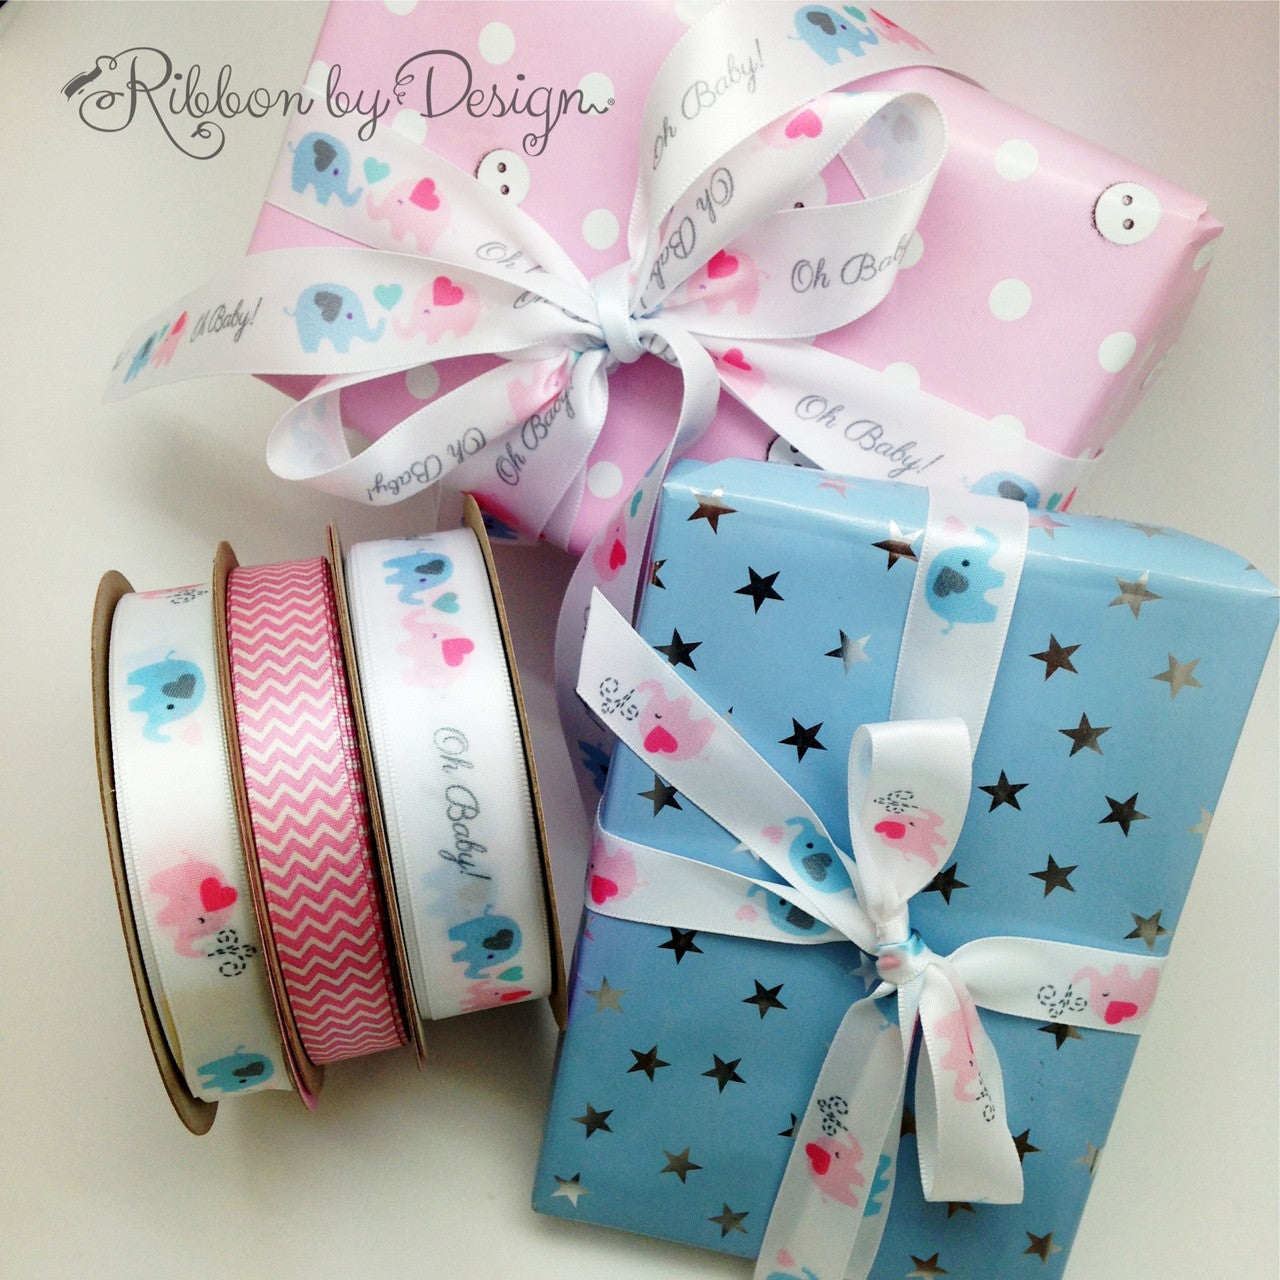 Whether the baby is a pink or a blue, our ribbons look wonderful on any baby present!